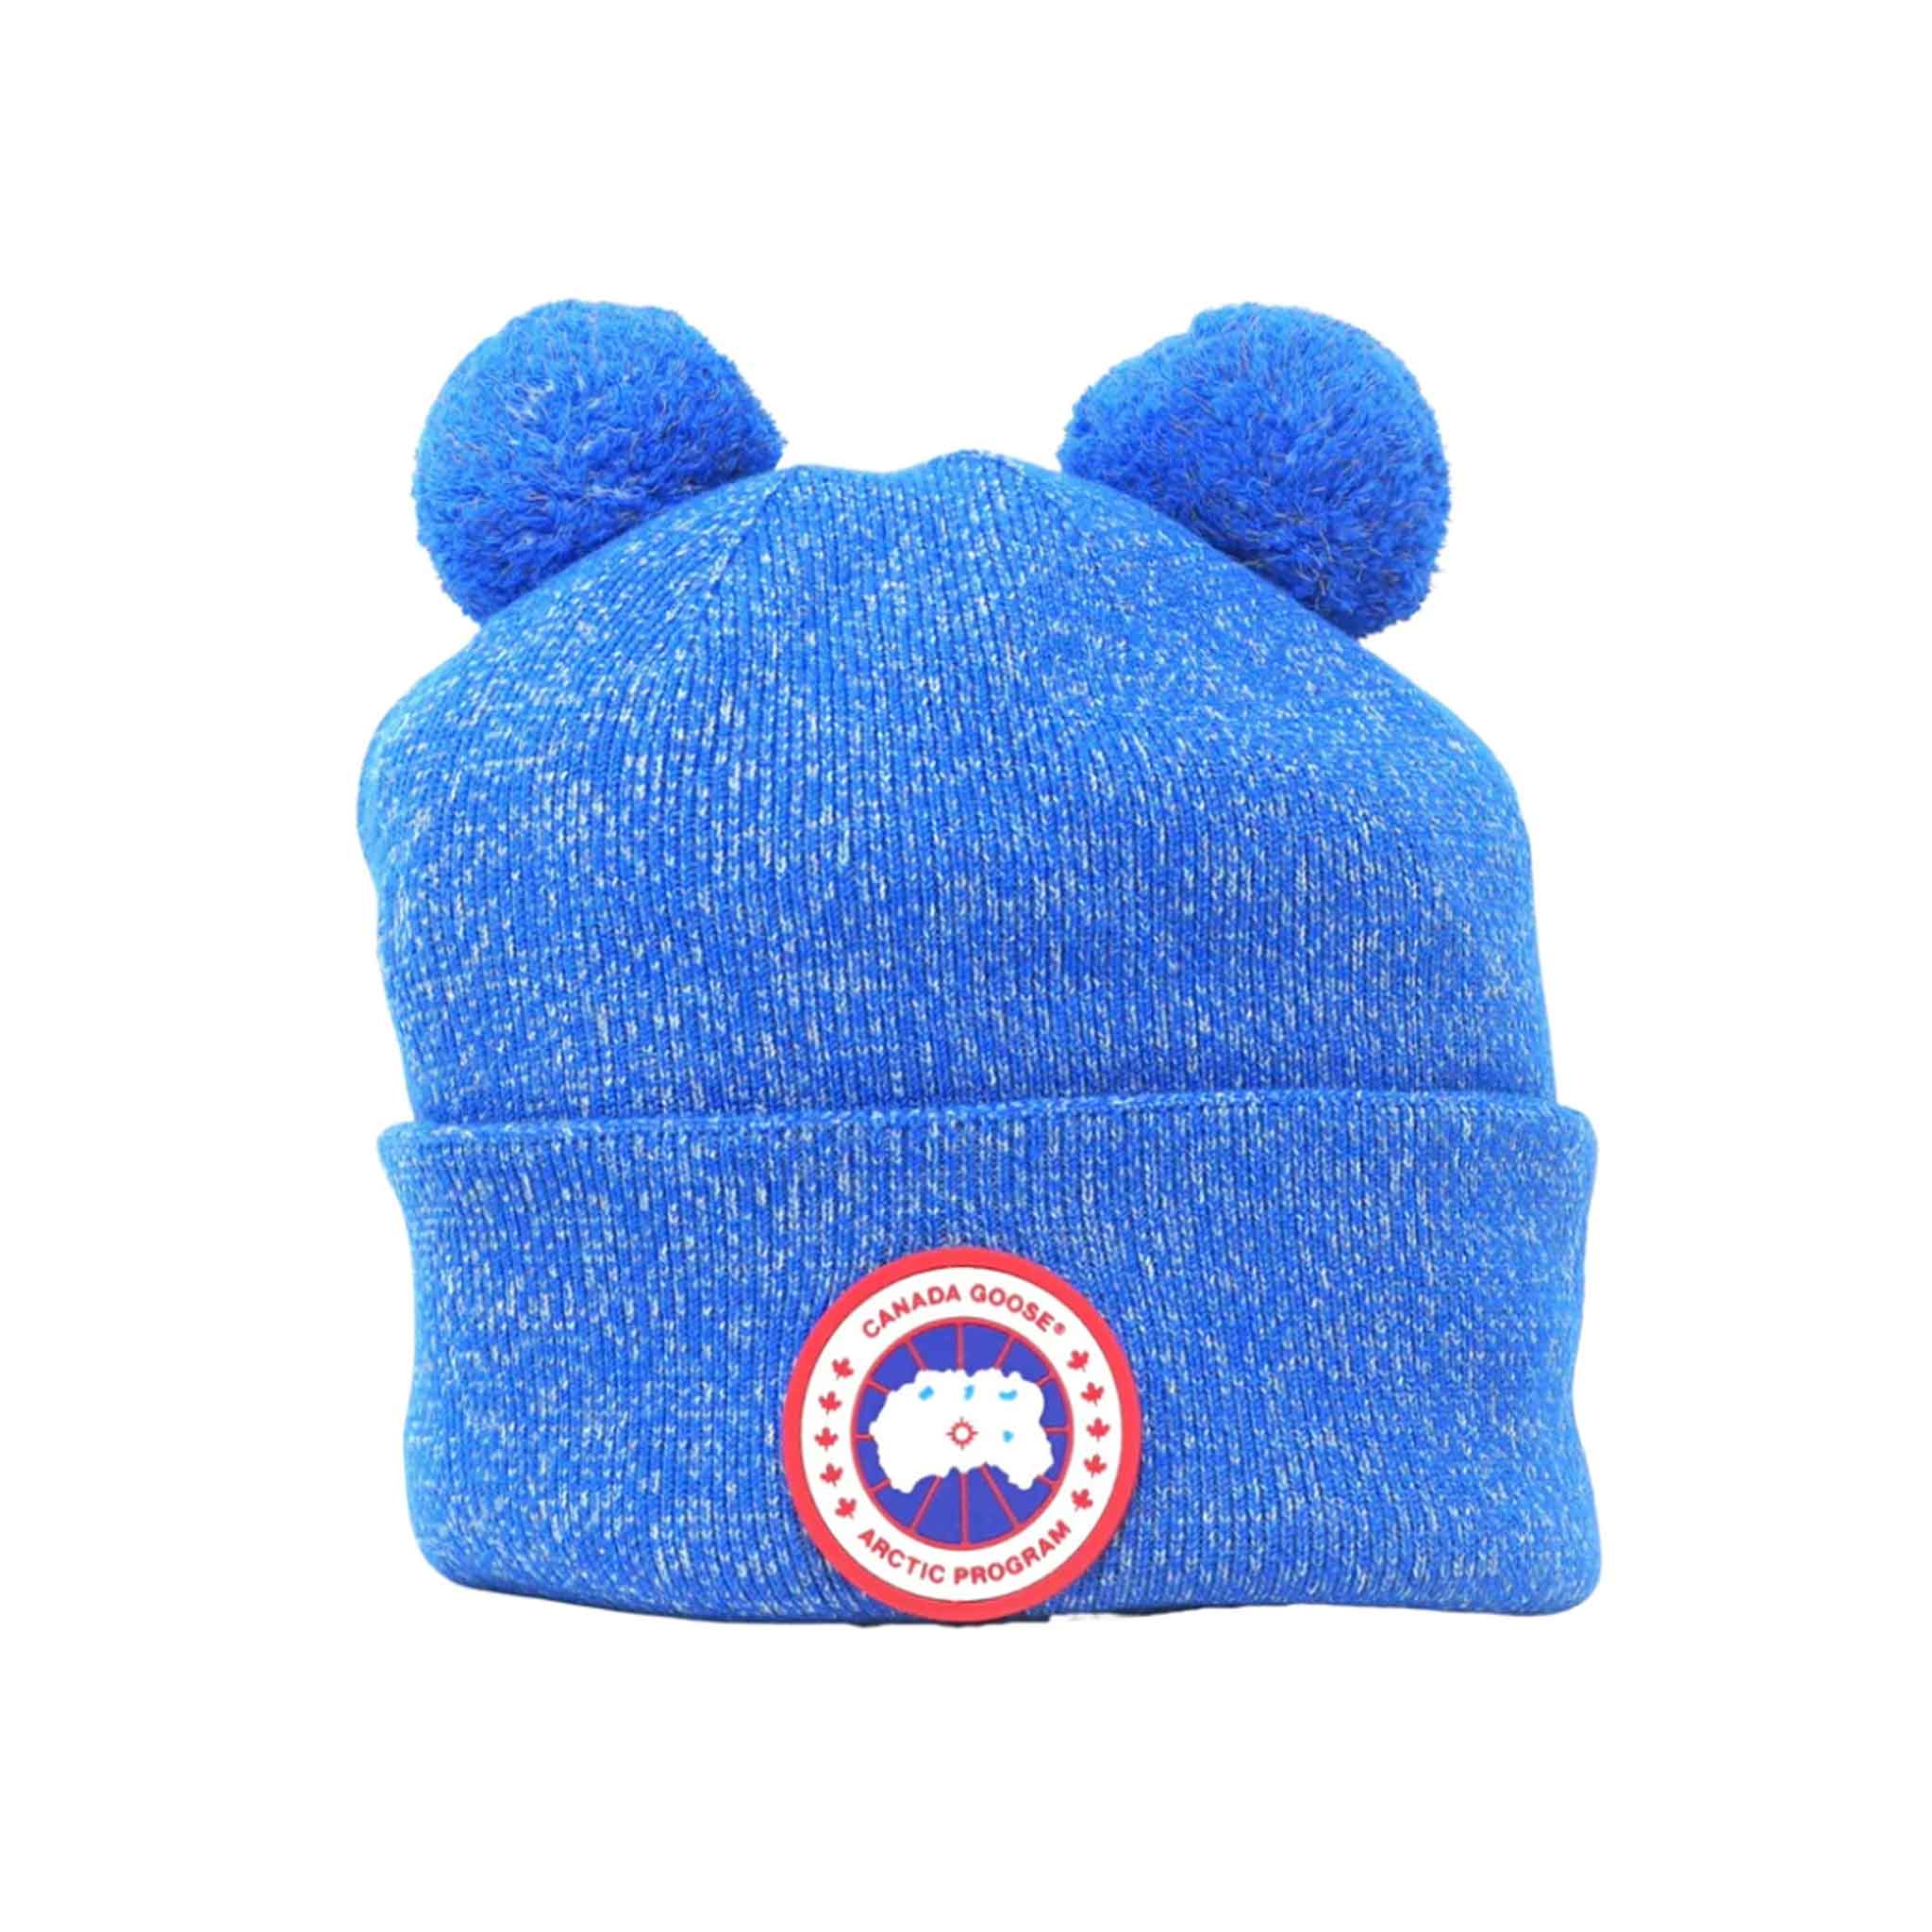 Canada Goose X Angel Chen Double Bobble Hat in Blue